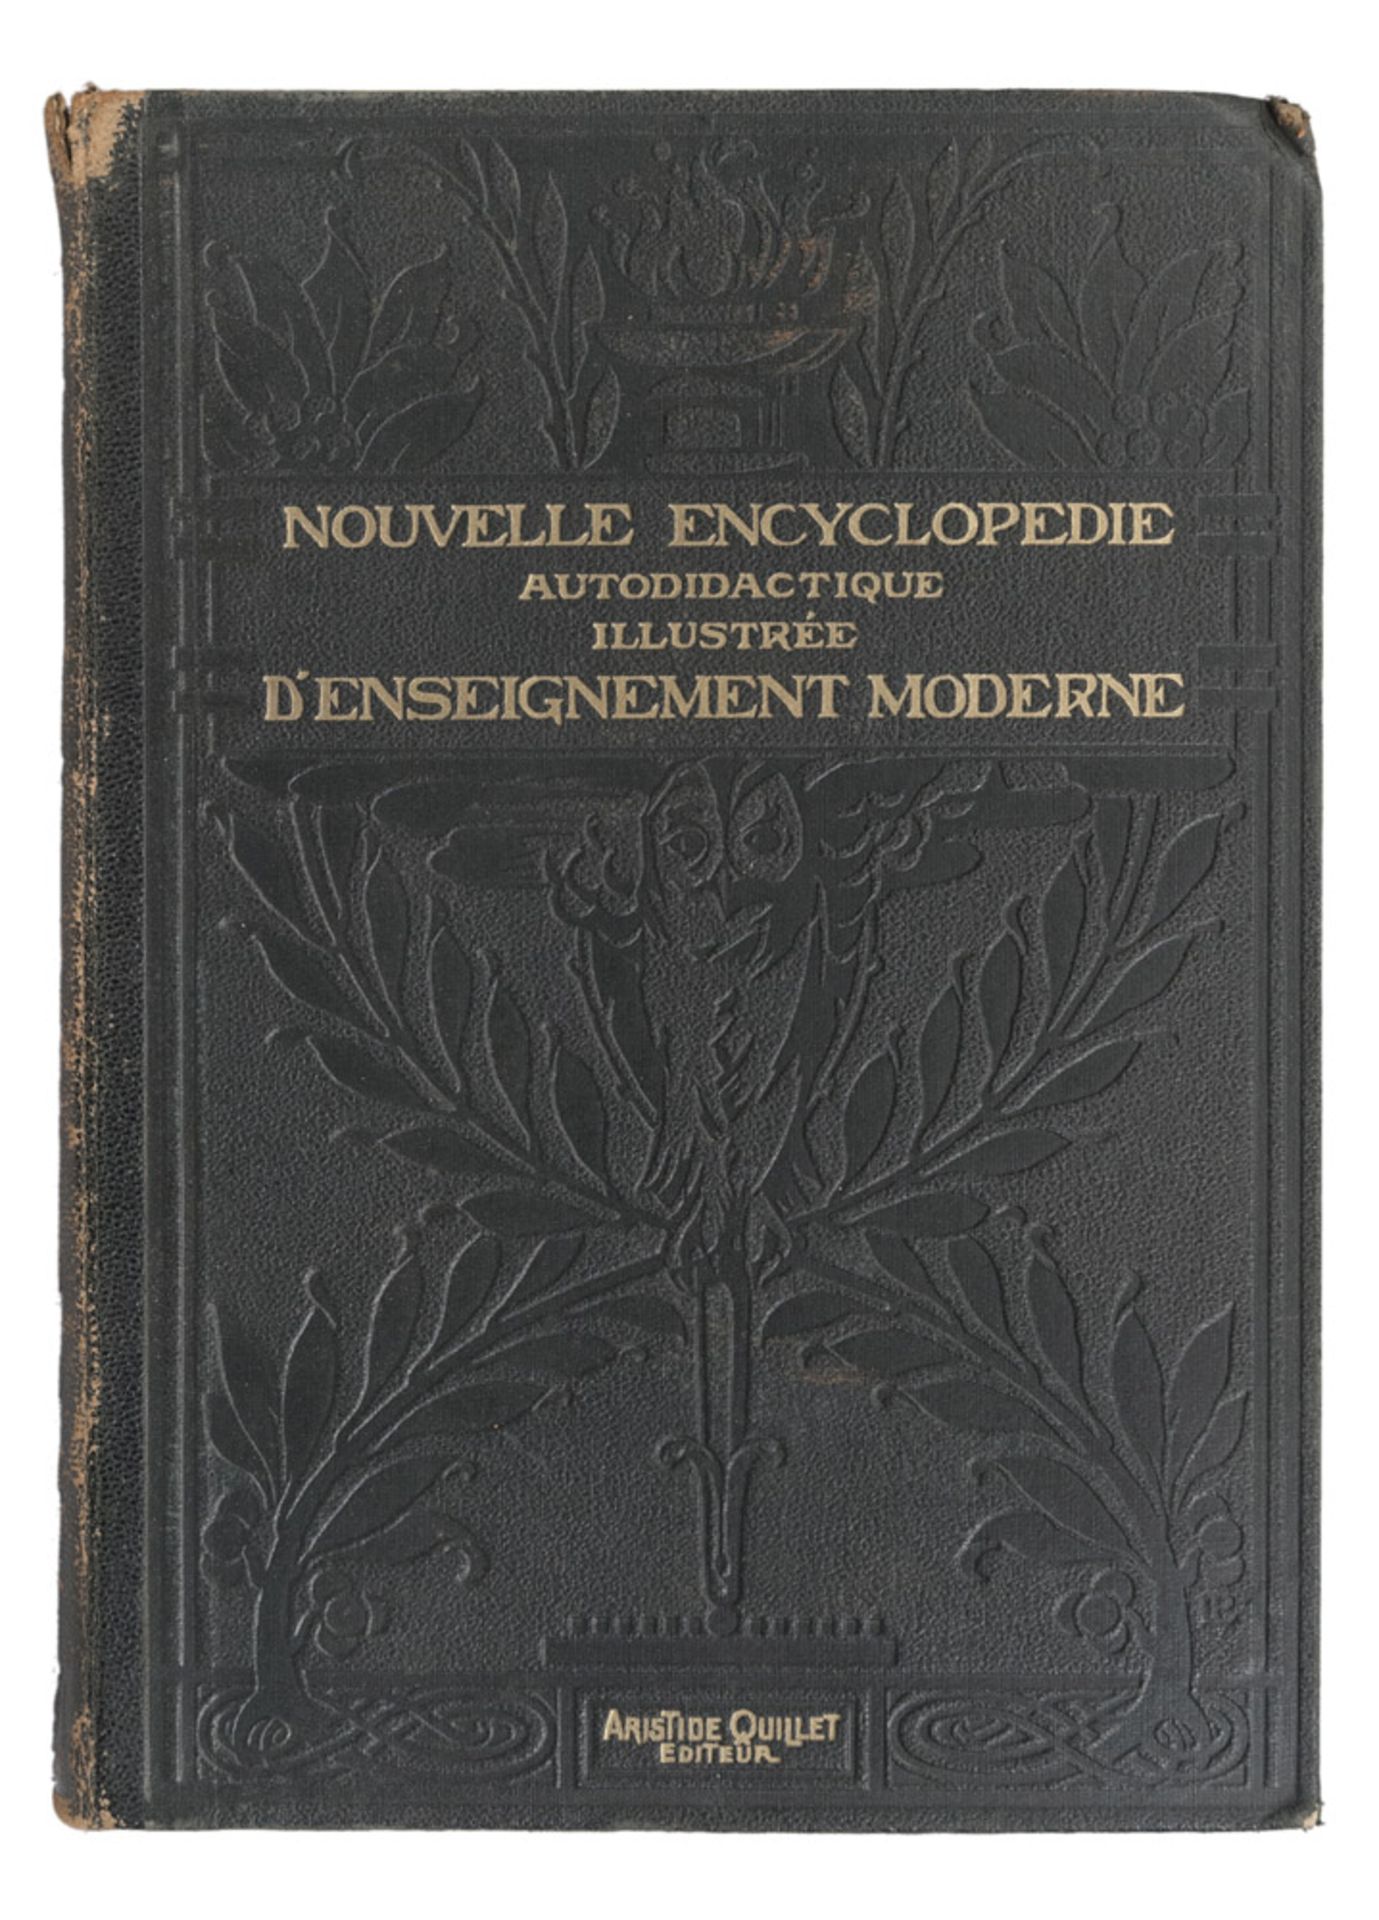 Nouvelle Encyclopedie of Modern ensegnement. Three volumes with illustrations and papers with